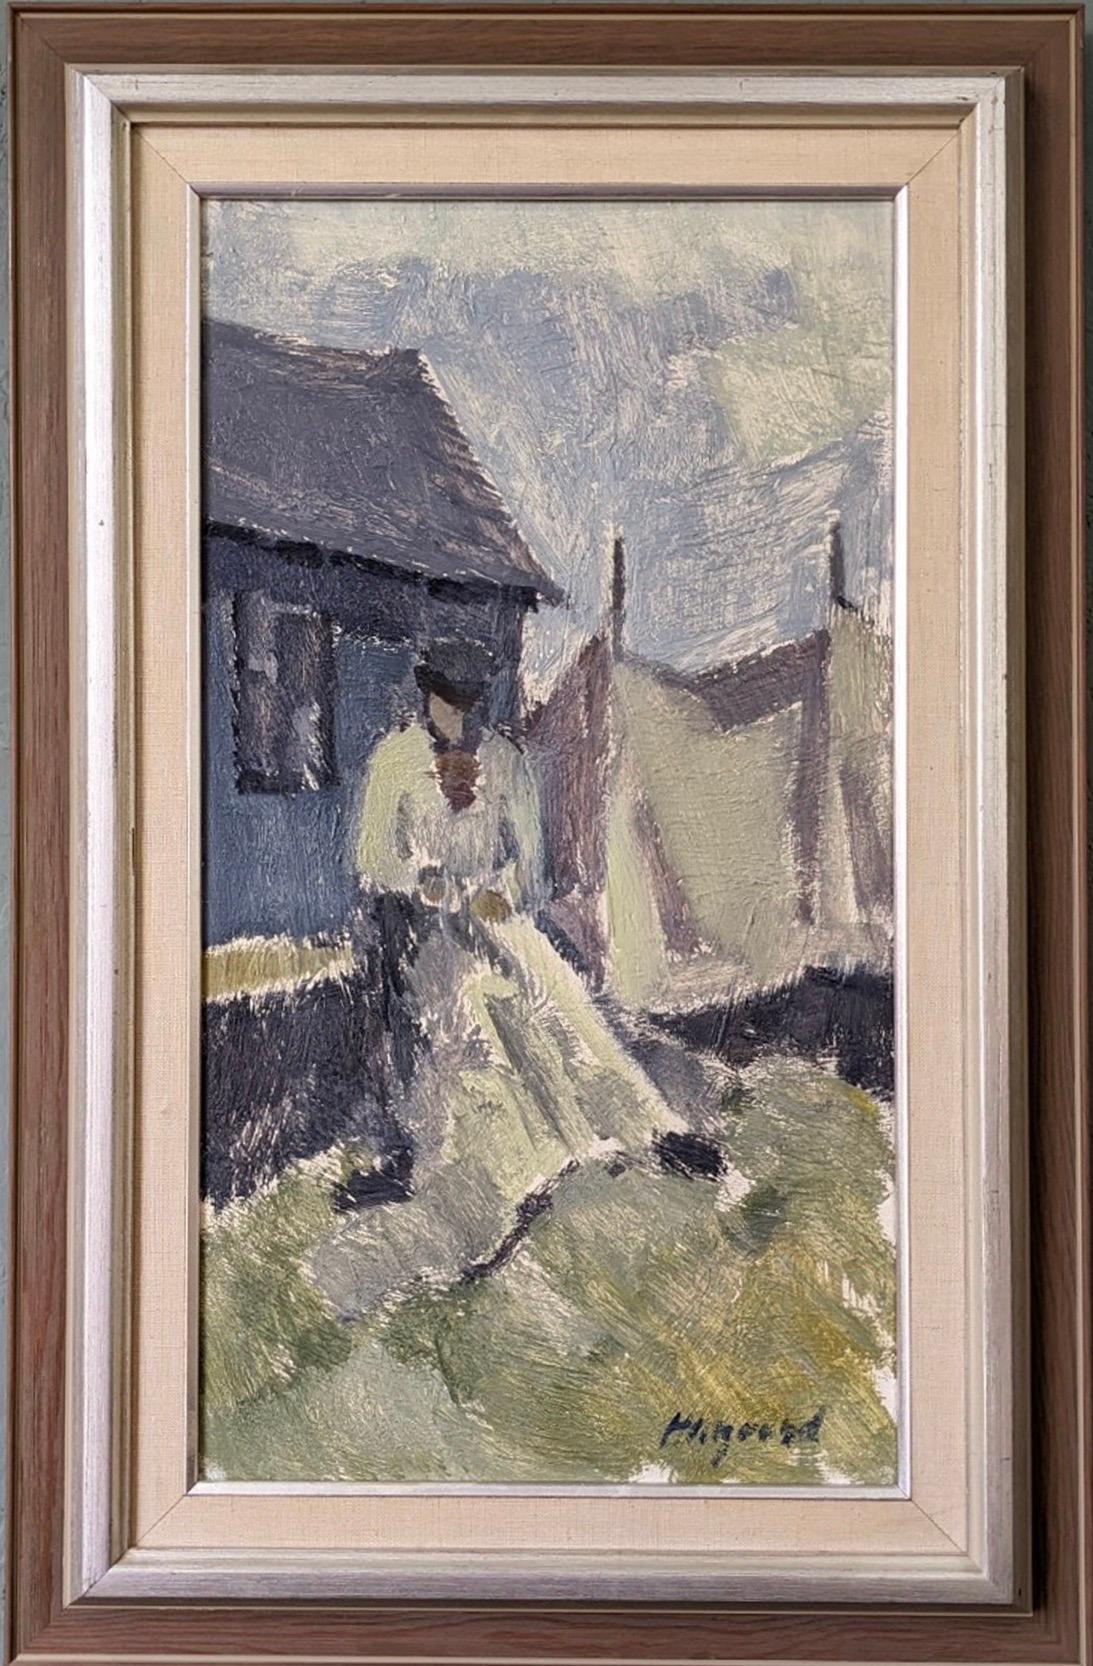 Unknown Figurative Painting - Vintage Mid-Century Modern Figurative Oil Framed Painting - The Fisherman